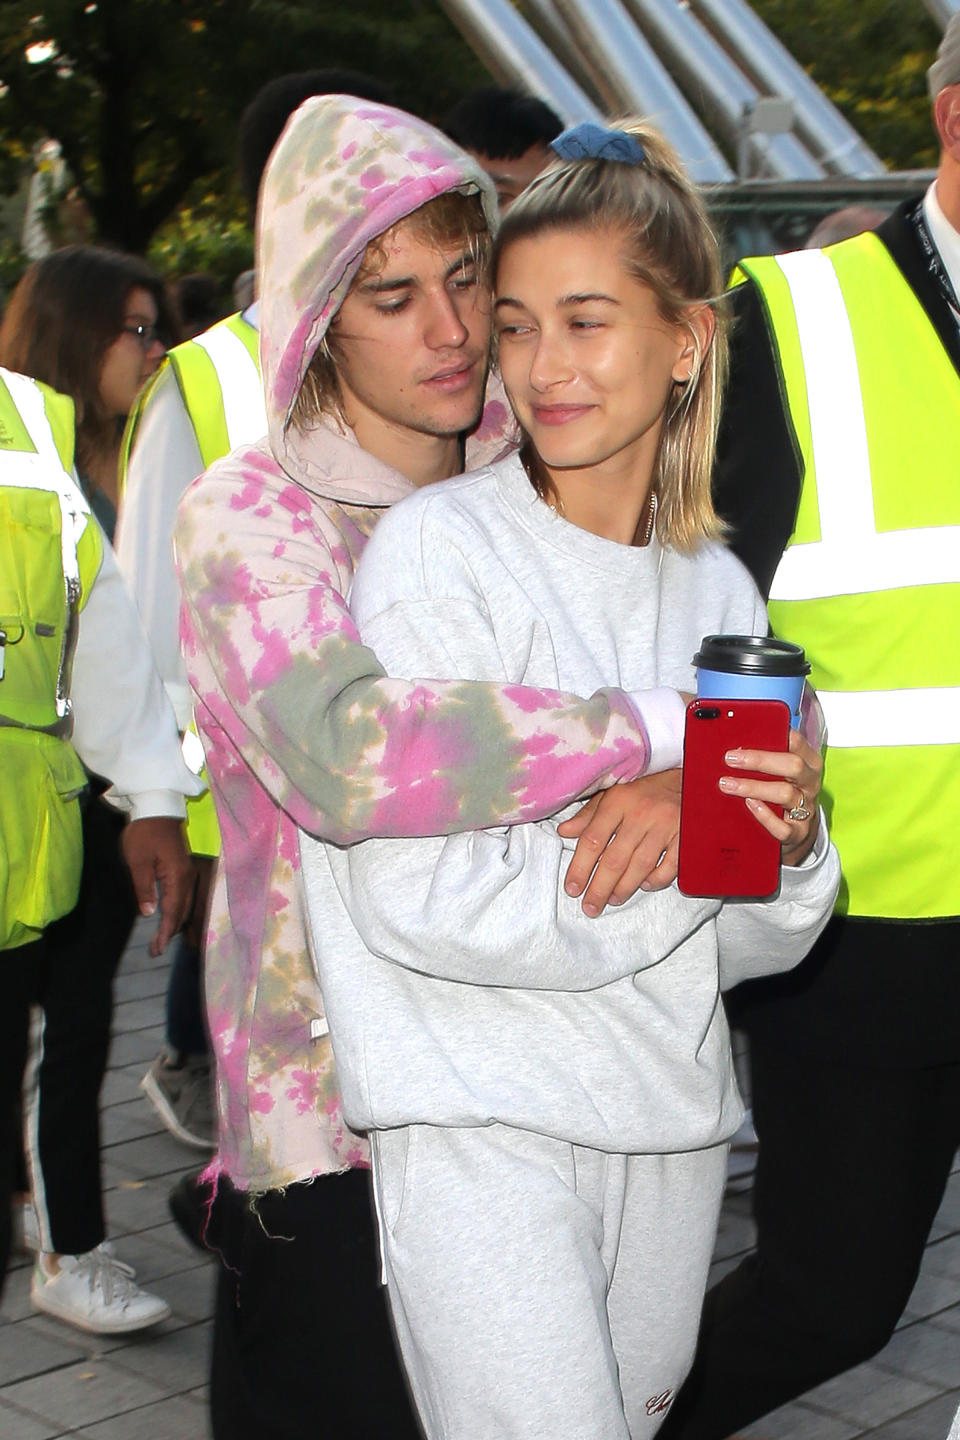 Justin with his arms around Hailey. They're both dressed casually in sweats